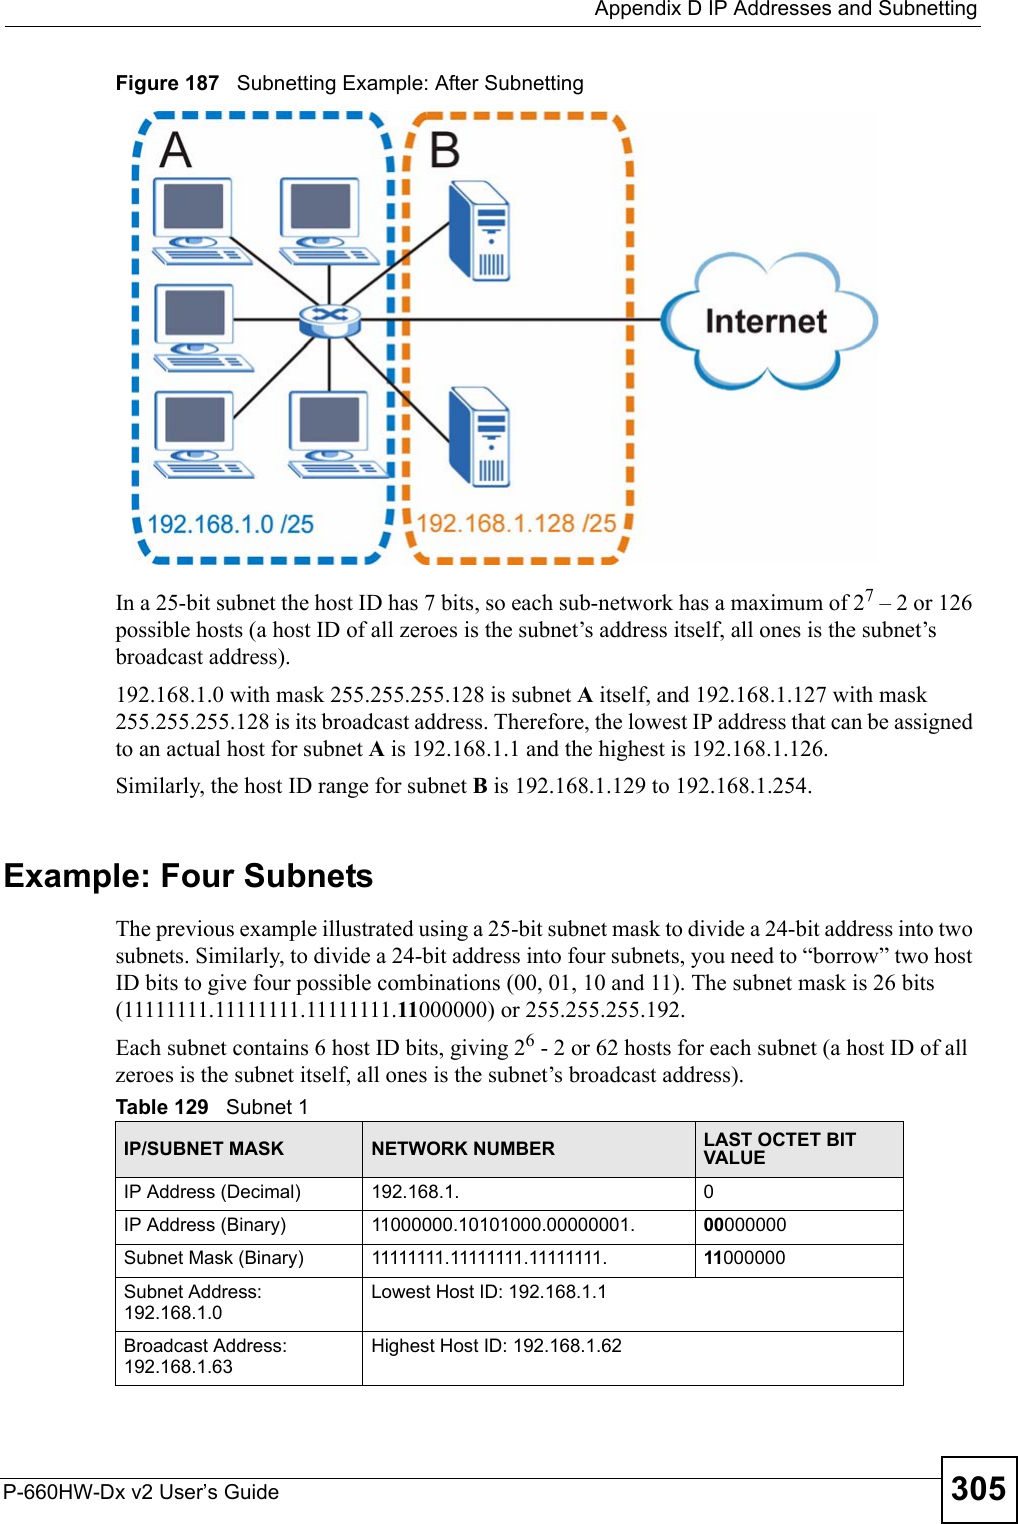  Appendix D IP Addresses and SubnettingP-660HW-Dx v2 User’s Guide 305Figure 187   Subnetting Example: After SubnettingIn a 25-bit subnet the host ID has 7 bits, so each sub-network has a maximum of 27 – 2 or 126 possible hosts (a host ID of all zeroes is the subnet’s address itself, all ones is the subnet’s broadcast address).192.168.1.0 with mask 255.255.255.128 is subnet A itself, and 192.168.1.127 with mask 255.255.255.128 is its broadcast address. Therefore, the lowest IP address that can be assigned to an actual host for subnet A is 192.168.1.1 and the highest is 192.168.1.126. Similarly, the host ID range for subnet B is 192.168.1.129 to 192.168.1.254.Example: Four Subnets The previous example illustrated using a 25-bit subnet mask to divide a 24-bit address into two subnets. Similarly, to divide a 24-bit address into four subnets, you need to “borrow” two host ID bits to give four possible combinations (00, 01, 10 and 11). The subnet mask is 26 bits (11111111.11111111.11111111.11000000) or 255.255.255.192. Each subnet contains 6 host ID bits, giving 26 - 2 or 62 hosts for each subnet (a host ID of all zeroes is the subnet itself, all ones is the subnet’s broadcast address). Table 129   Subnet 1IP/SUBNET MASK NETWORK NUMBER LAST OCTET BIT VALUEIP Address (Decimal) 192.168.1. 0IP Address (Binary) 11000000.10101000.00000001. 00000000Subnet Mask (Binary) 11111111.11111111.11111111. 11000000Subnet Address: 192.168.1.0Lowest Host ID: 192.168.1.1Broadcast Address: 192.168.1.63Highest Host ID: 192.168.1.62